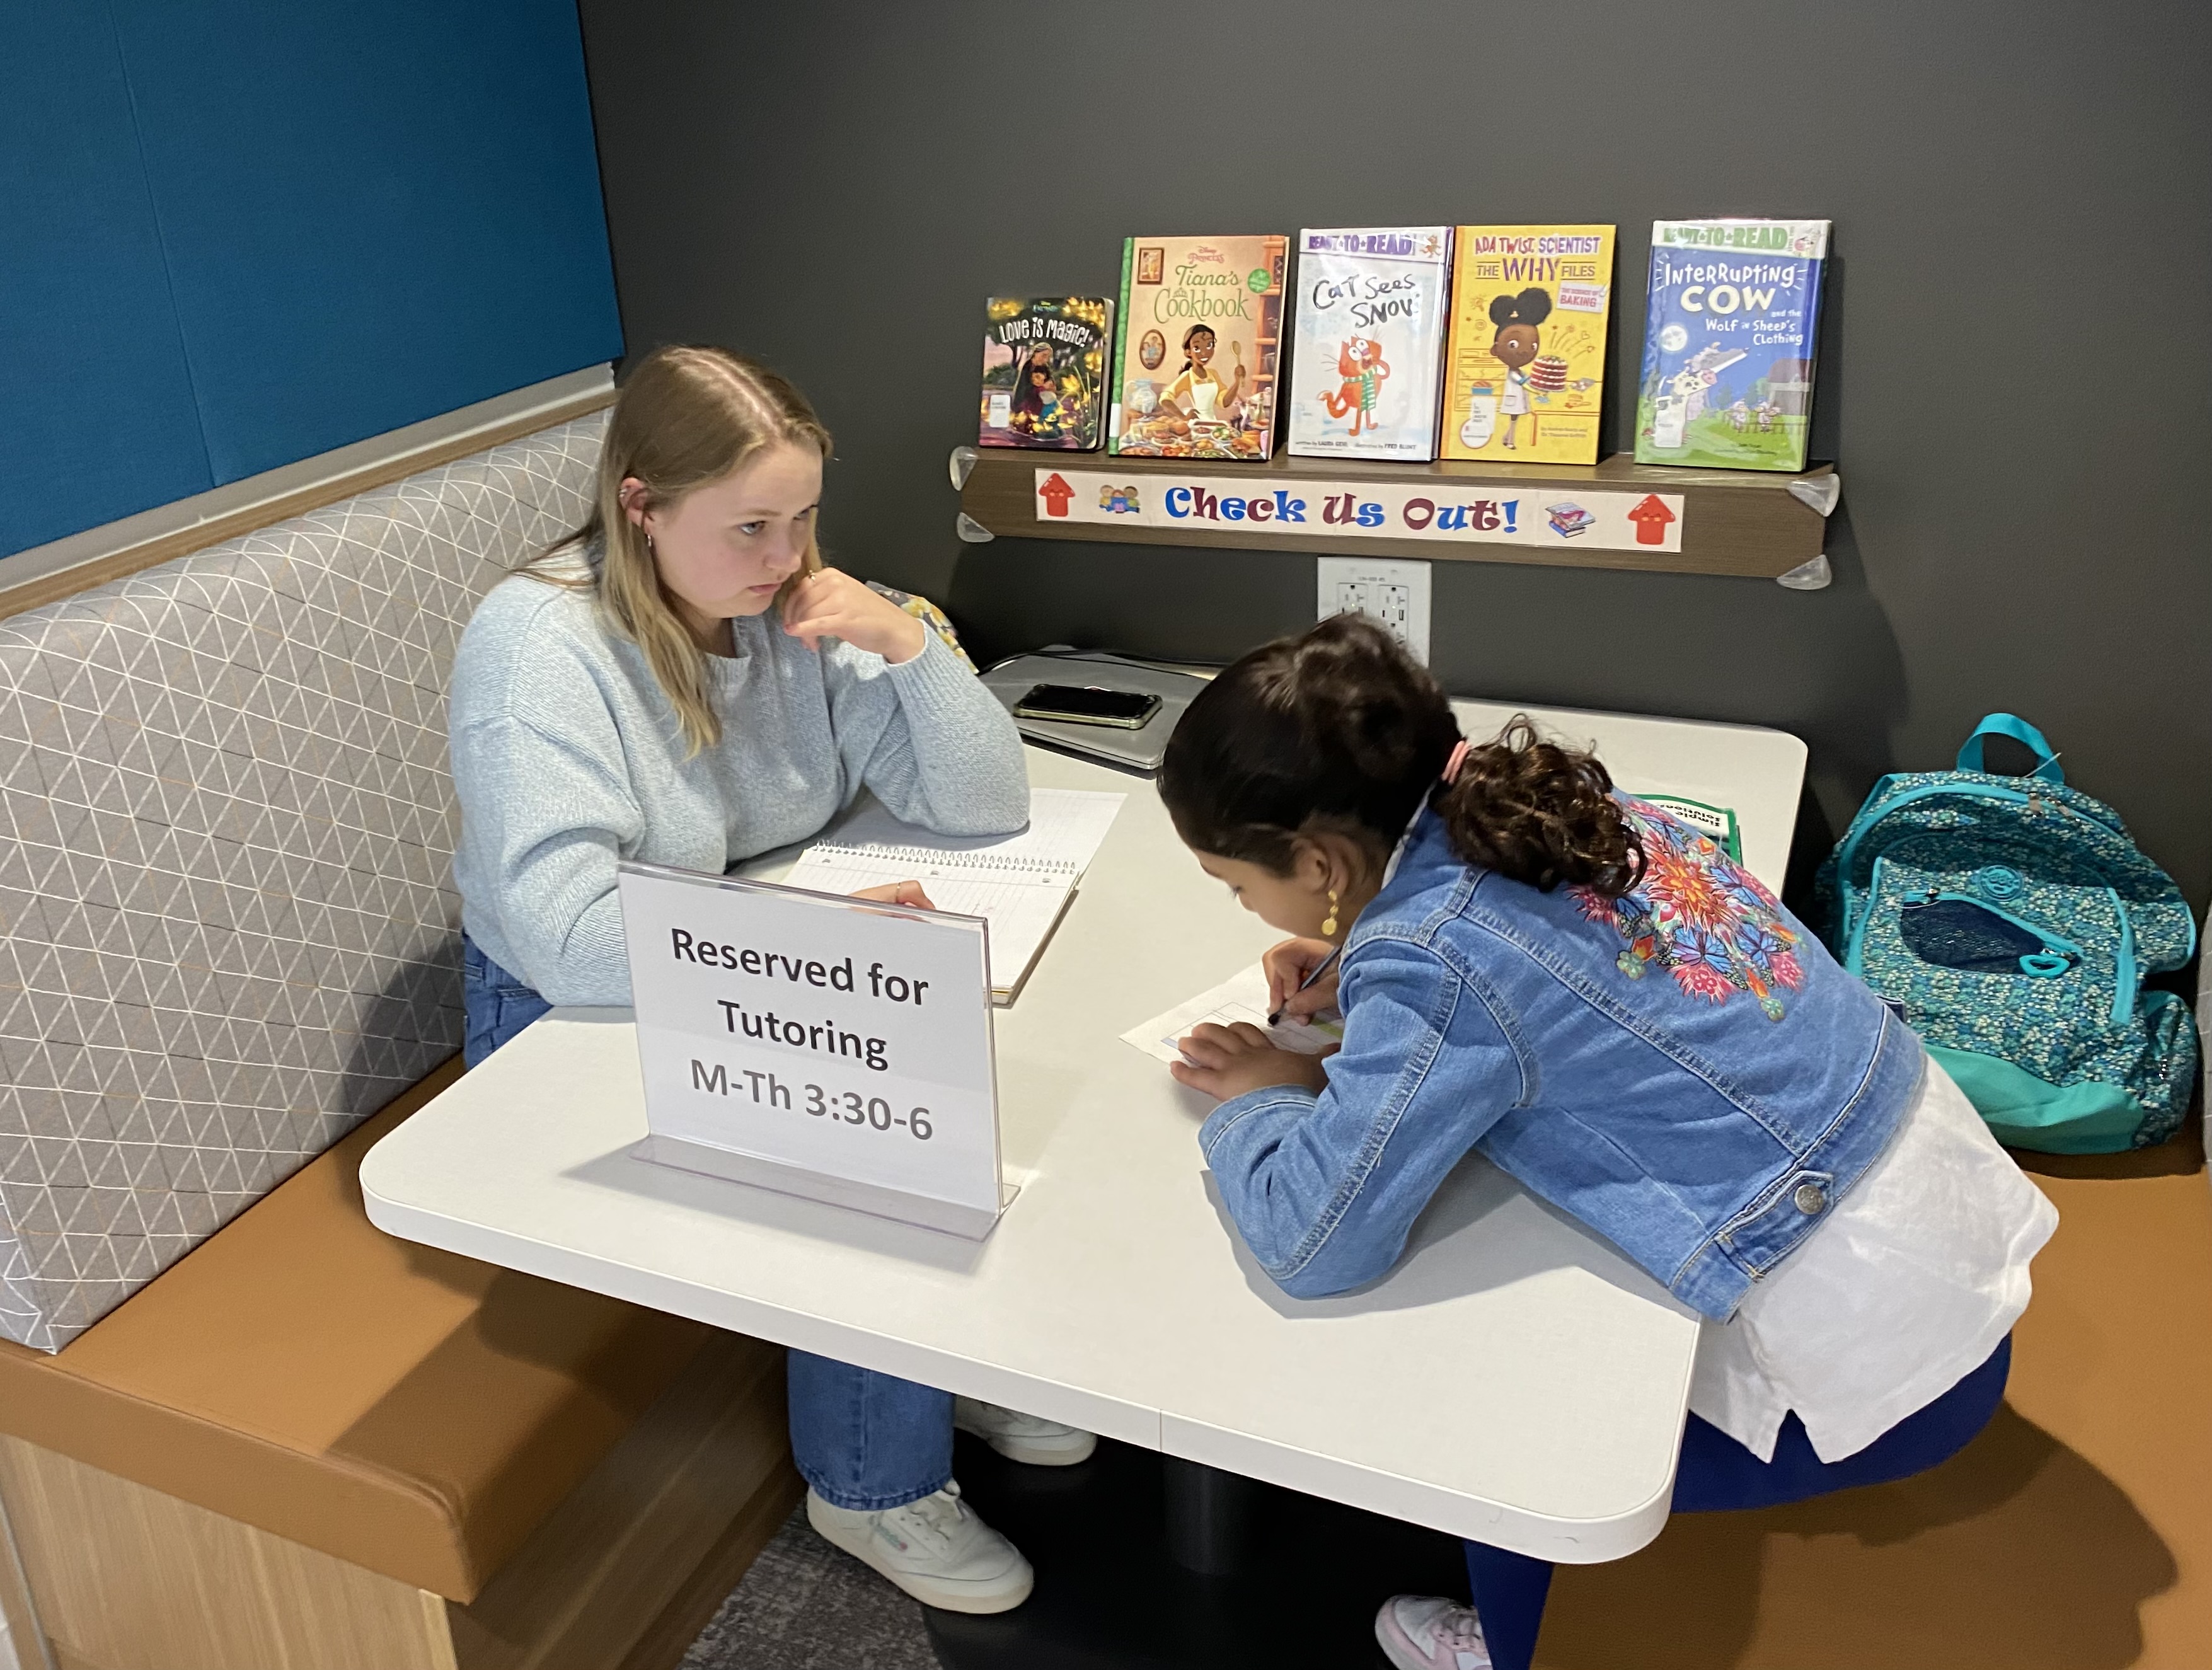 Cally Hardwick tutoring in action at CPL West Park Branch